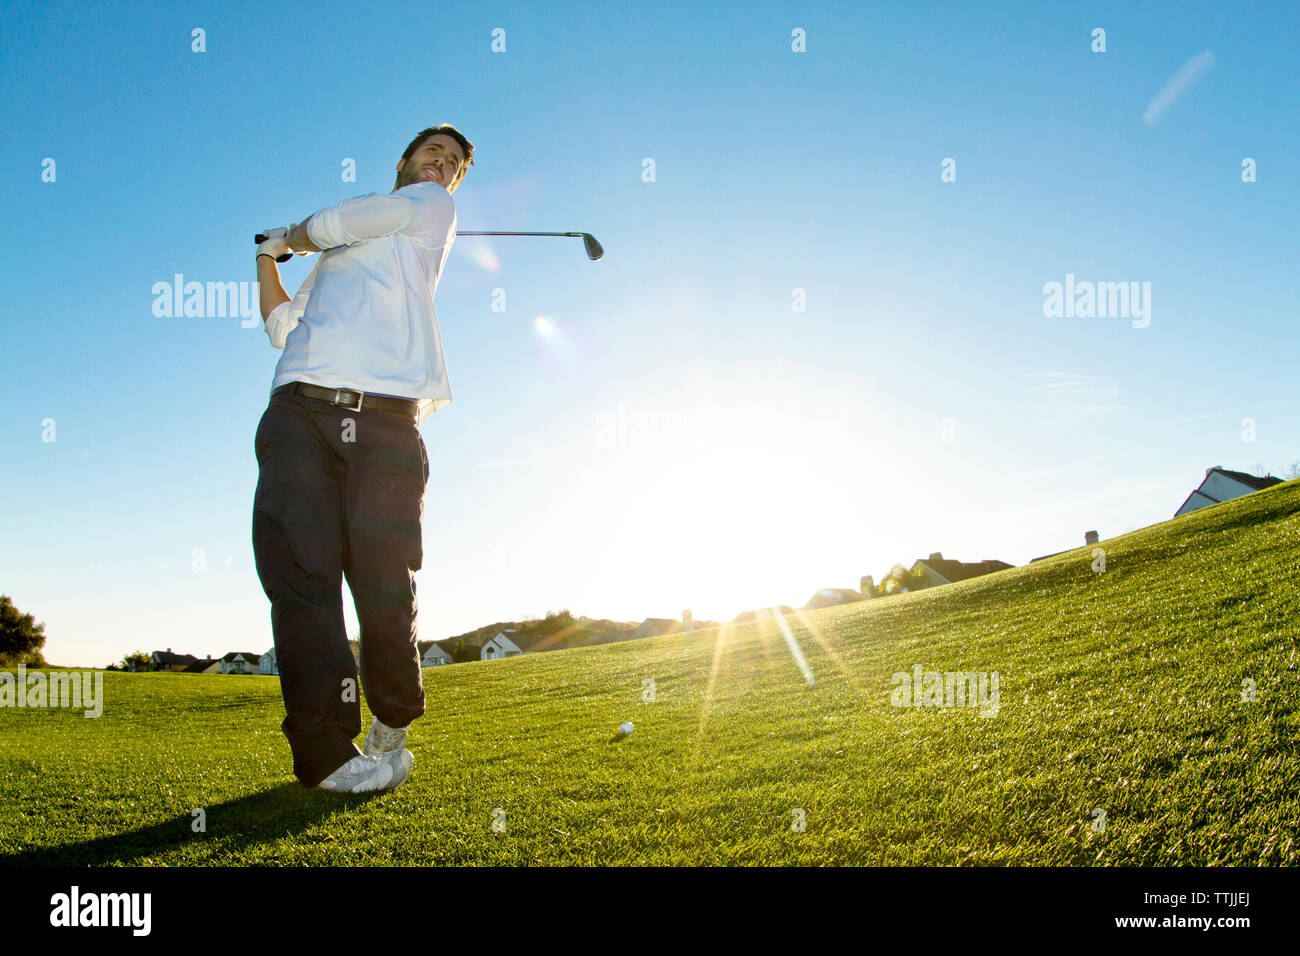 Man taking a shot of golf while standing against clear sky Stock Photo